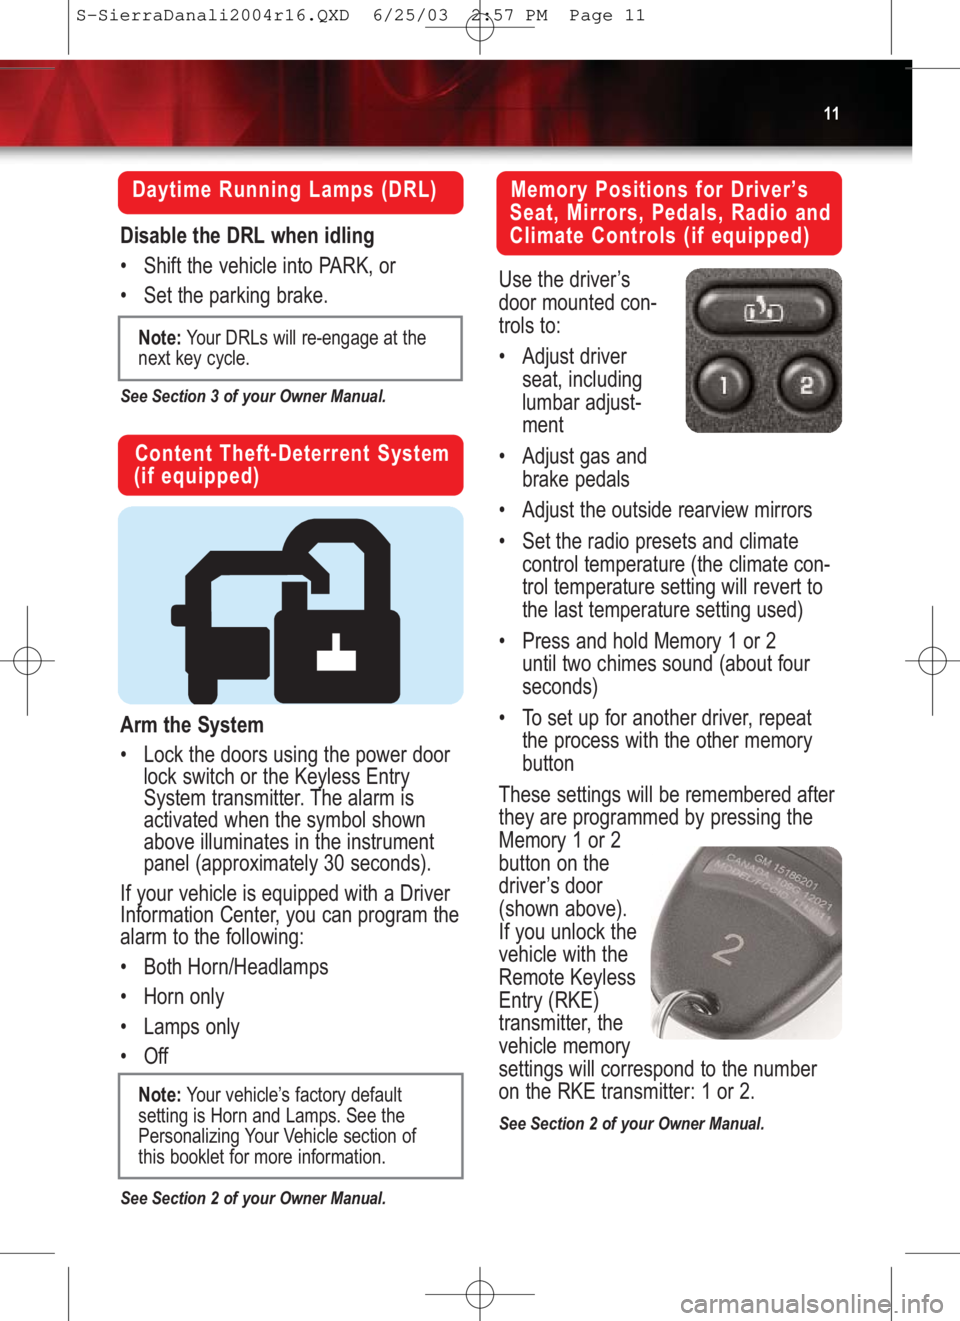 GMC SIERRA 2004  Get To Know Guide 11
Daytime Running Lamps (DRL)
Disable the DRL when idling
•Shift the vehicle into PARK, or
•Set the parking brake. 
See Section 3 of your Owner Manual.
Content Theft-Deterrent System
(if equipped